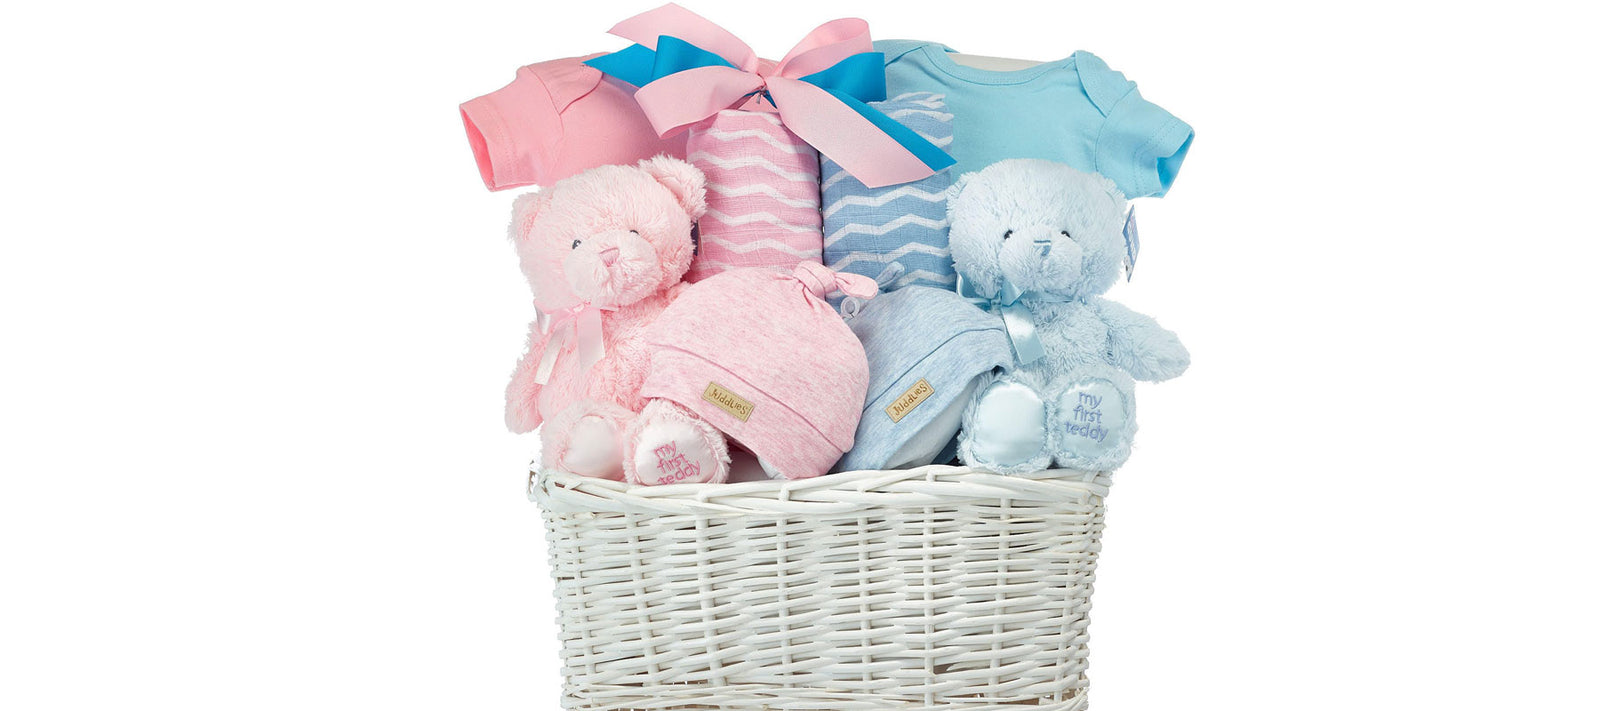 Baby Shower Gifting Etiquette For A Coworker